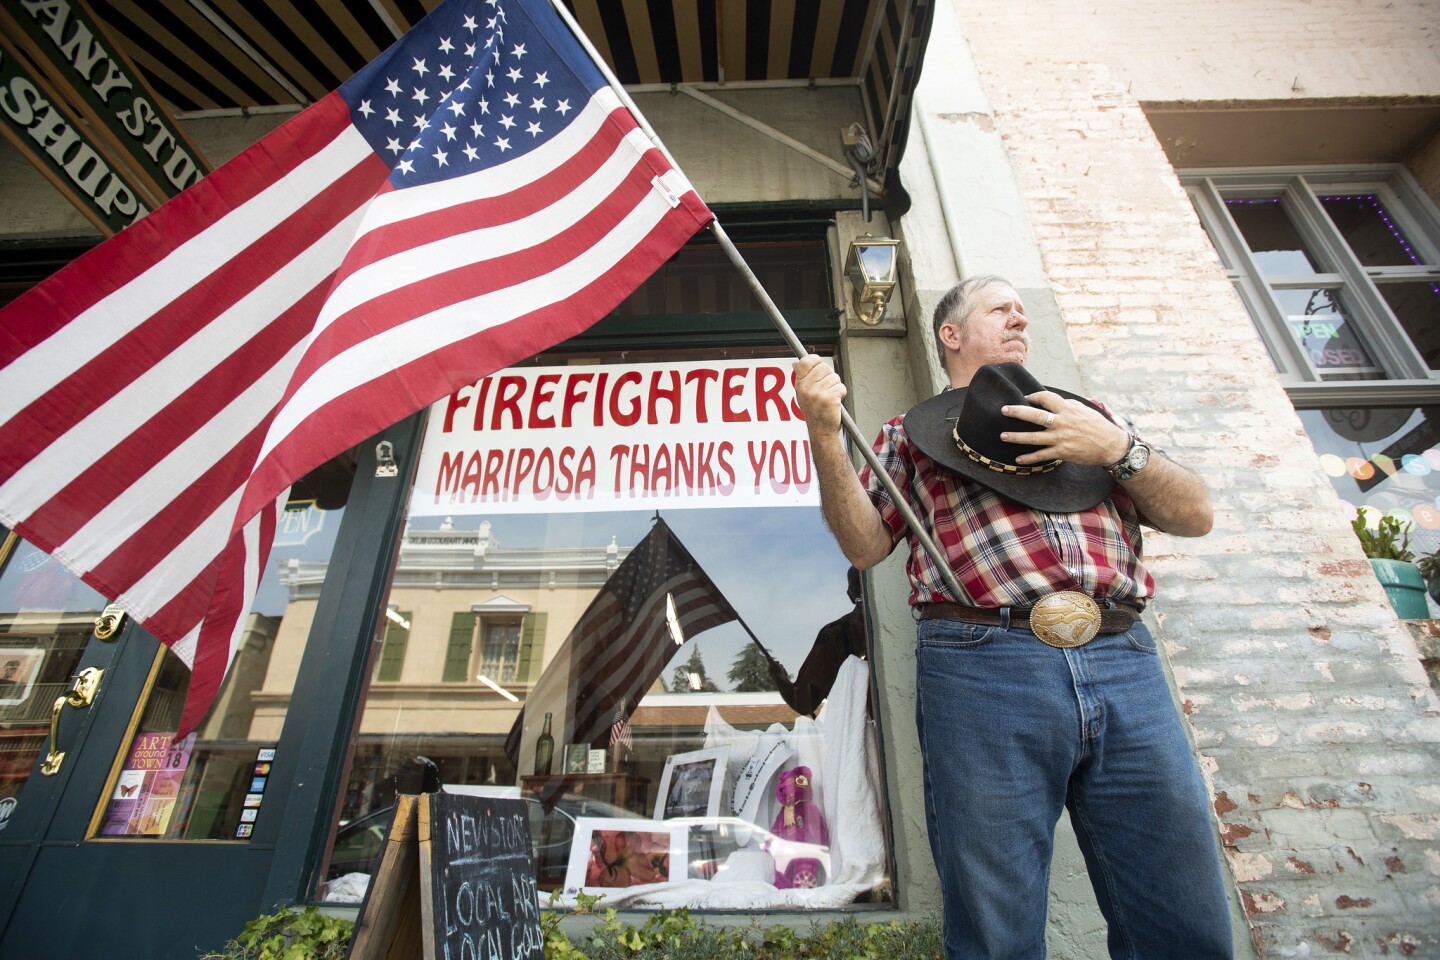 Charles Phillips waits for a procession carrying the body of firefighter Braden Varney in Mariposa, Calif. Varney died Saturday while battling the Ferguson fire when his bulldozer overturned.